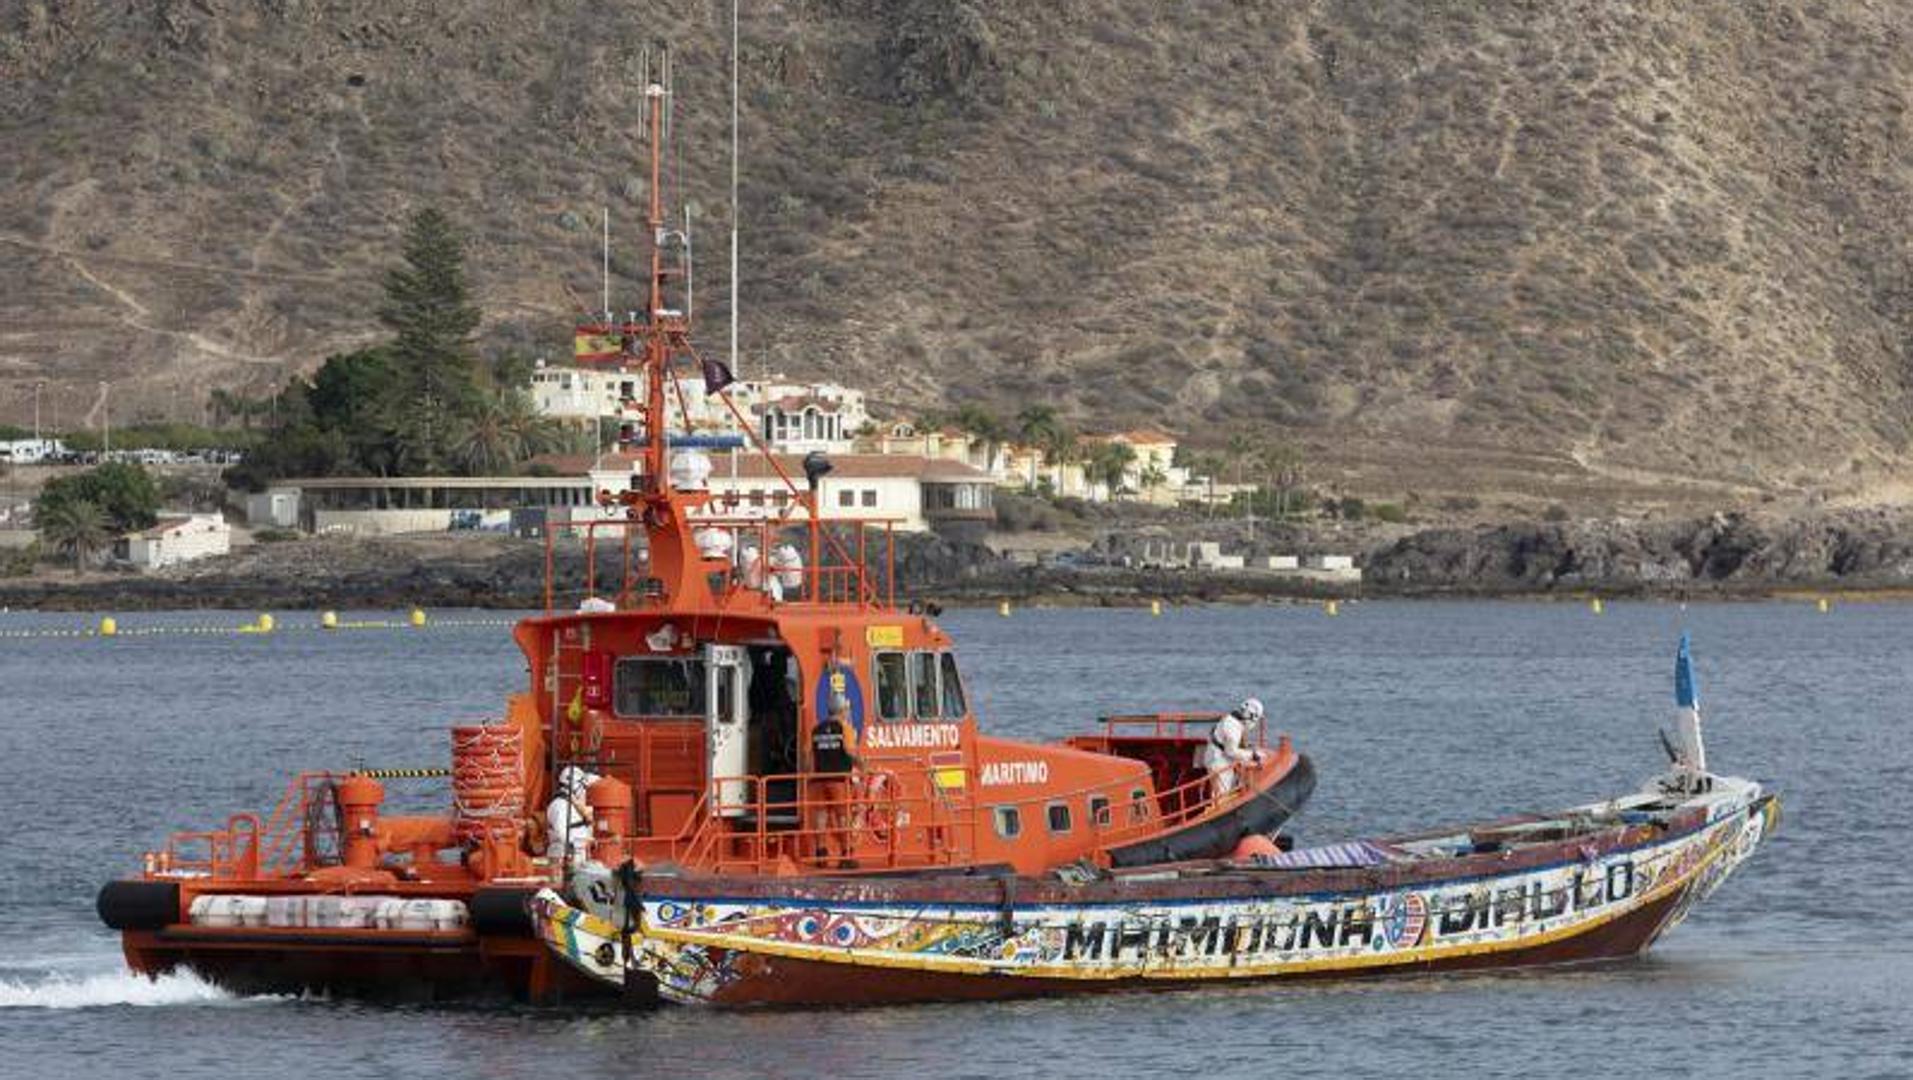 A canoe with 139 people on board is rescued in waters near Tenerife